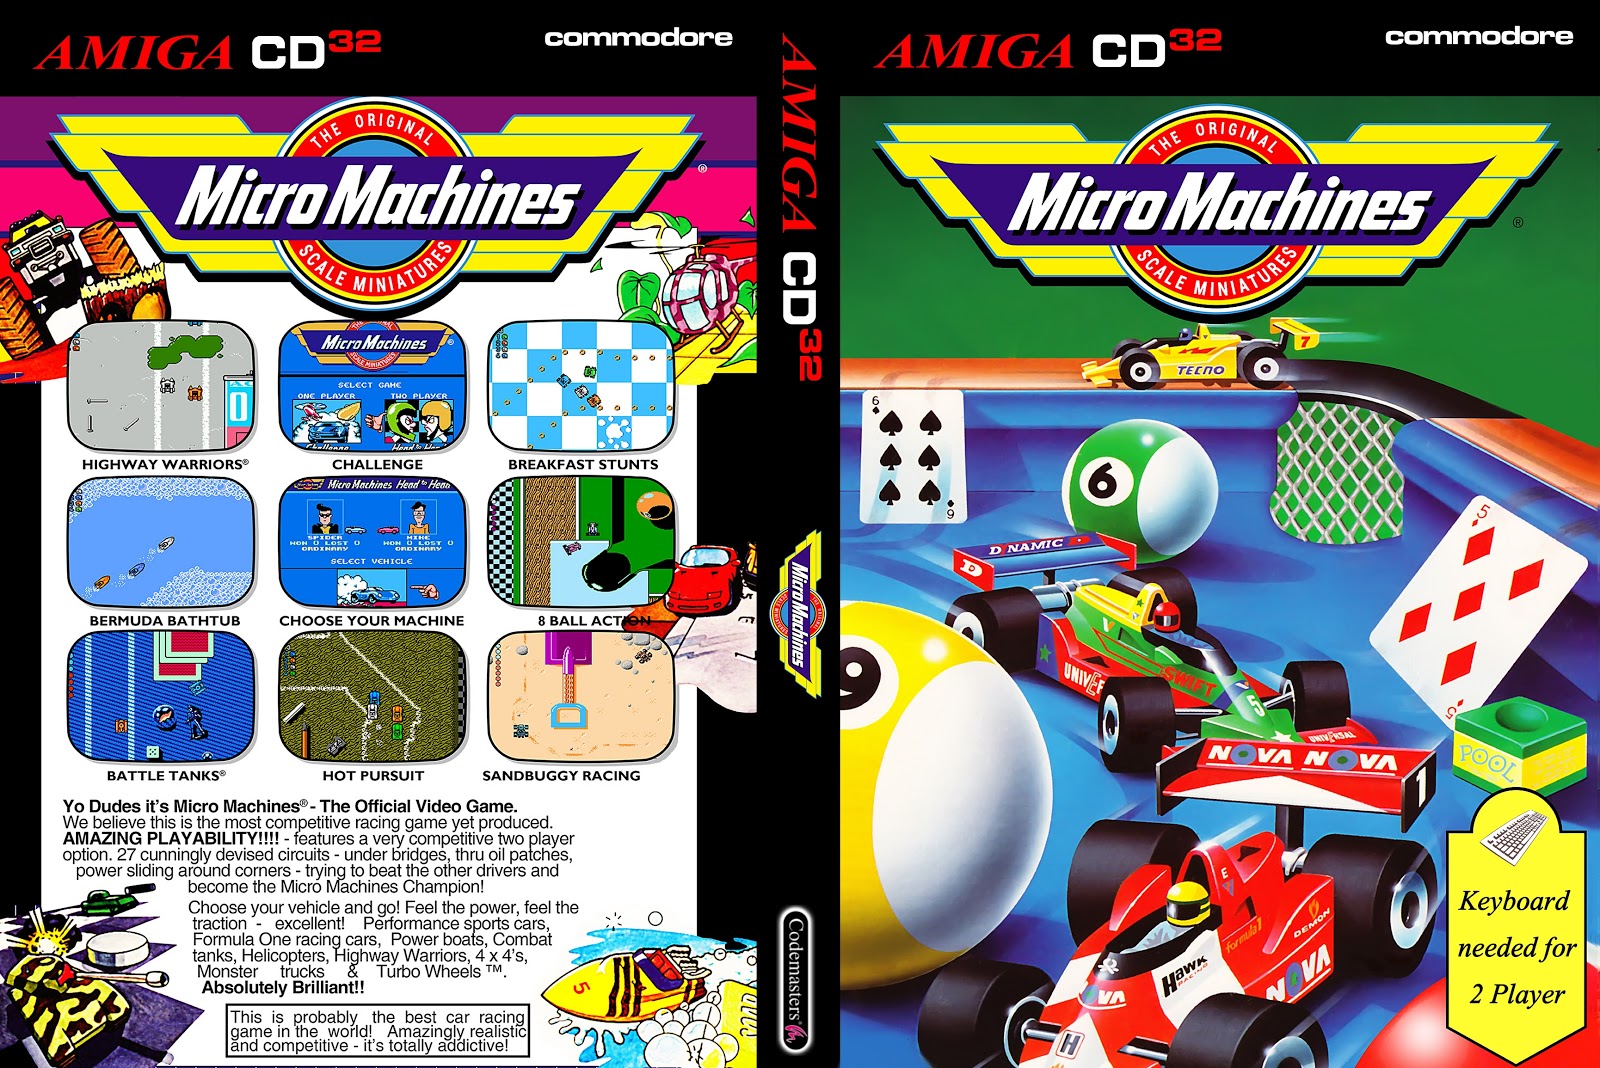 [Jeu] Suite d'images !  - Page 5 Micro_machinesCD32Cover